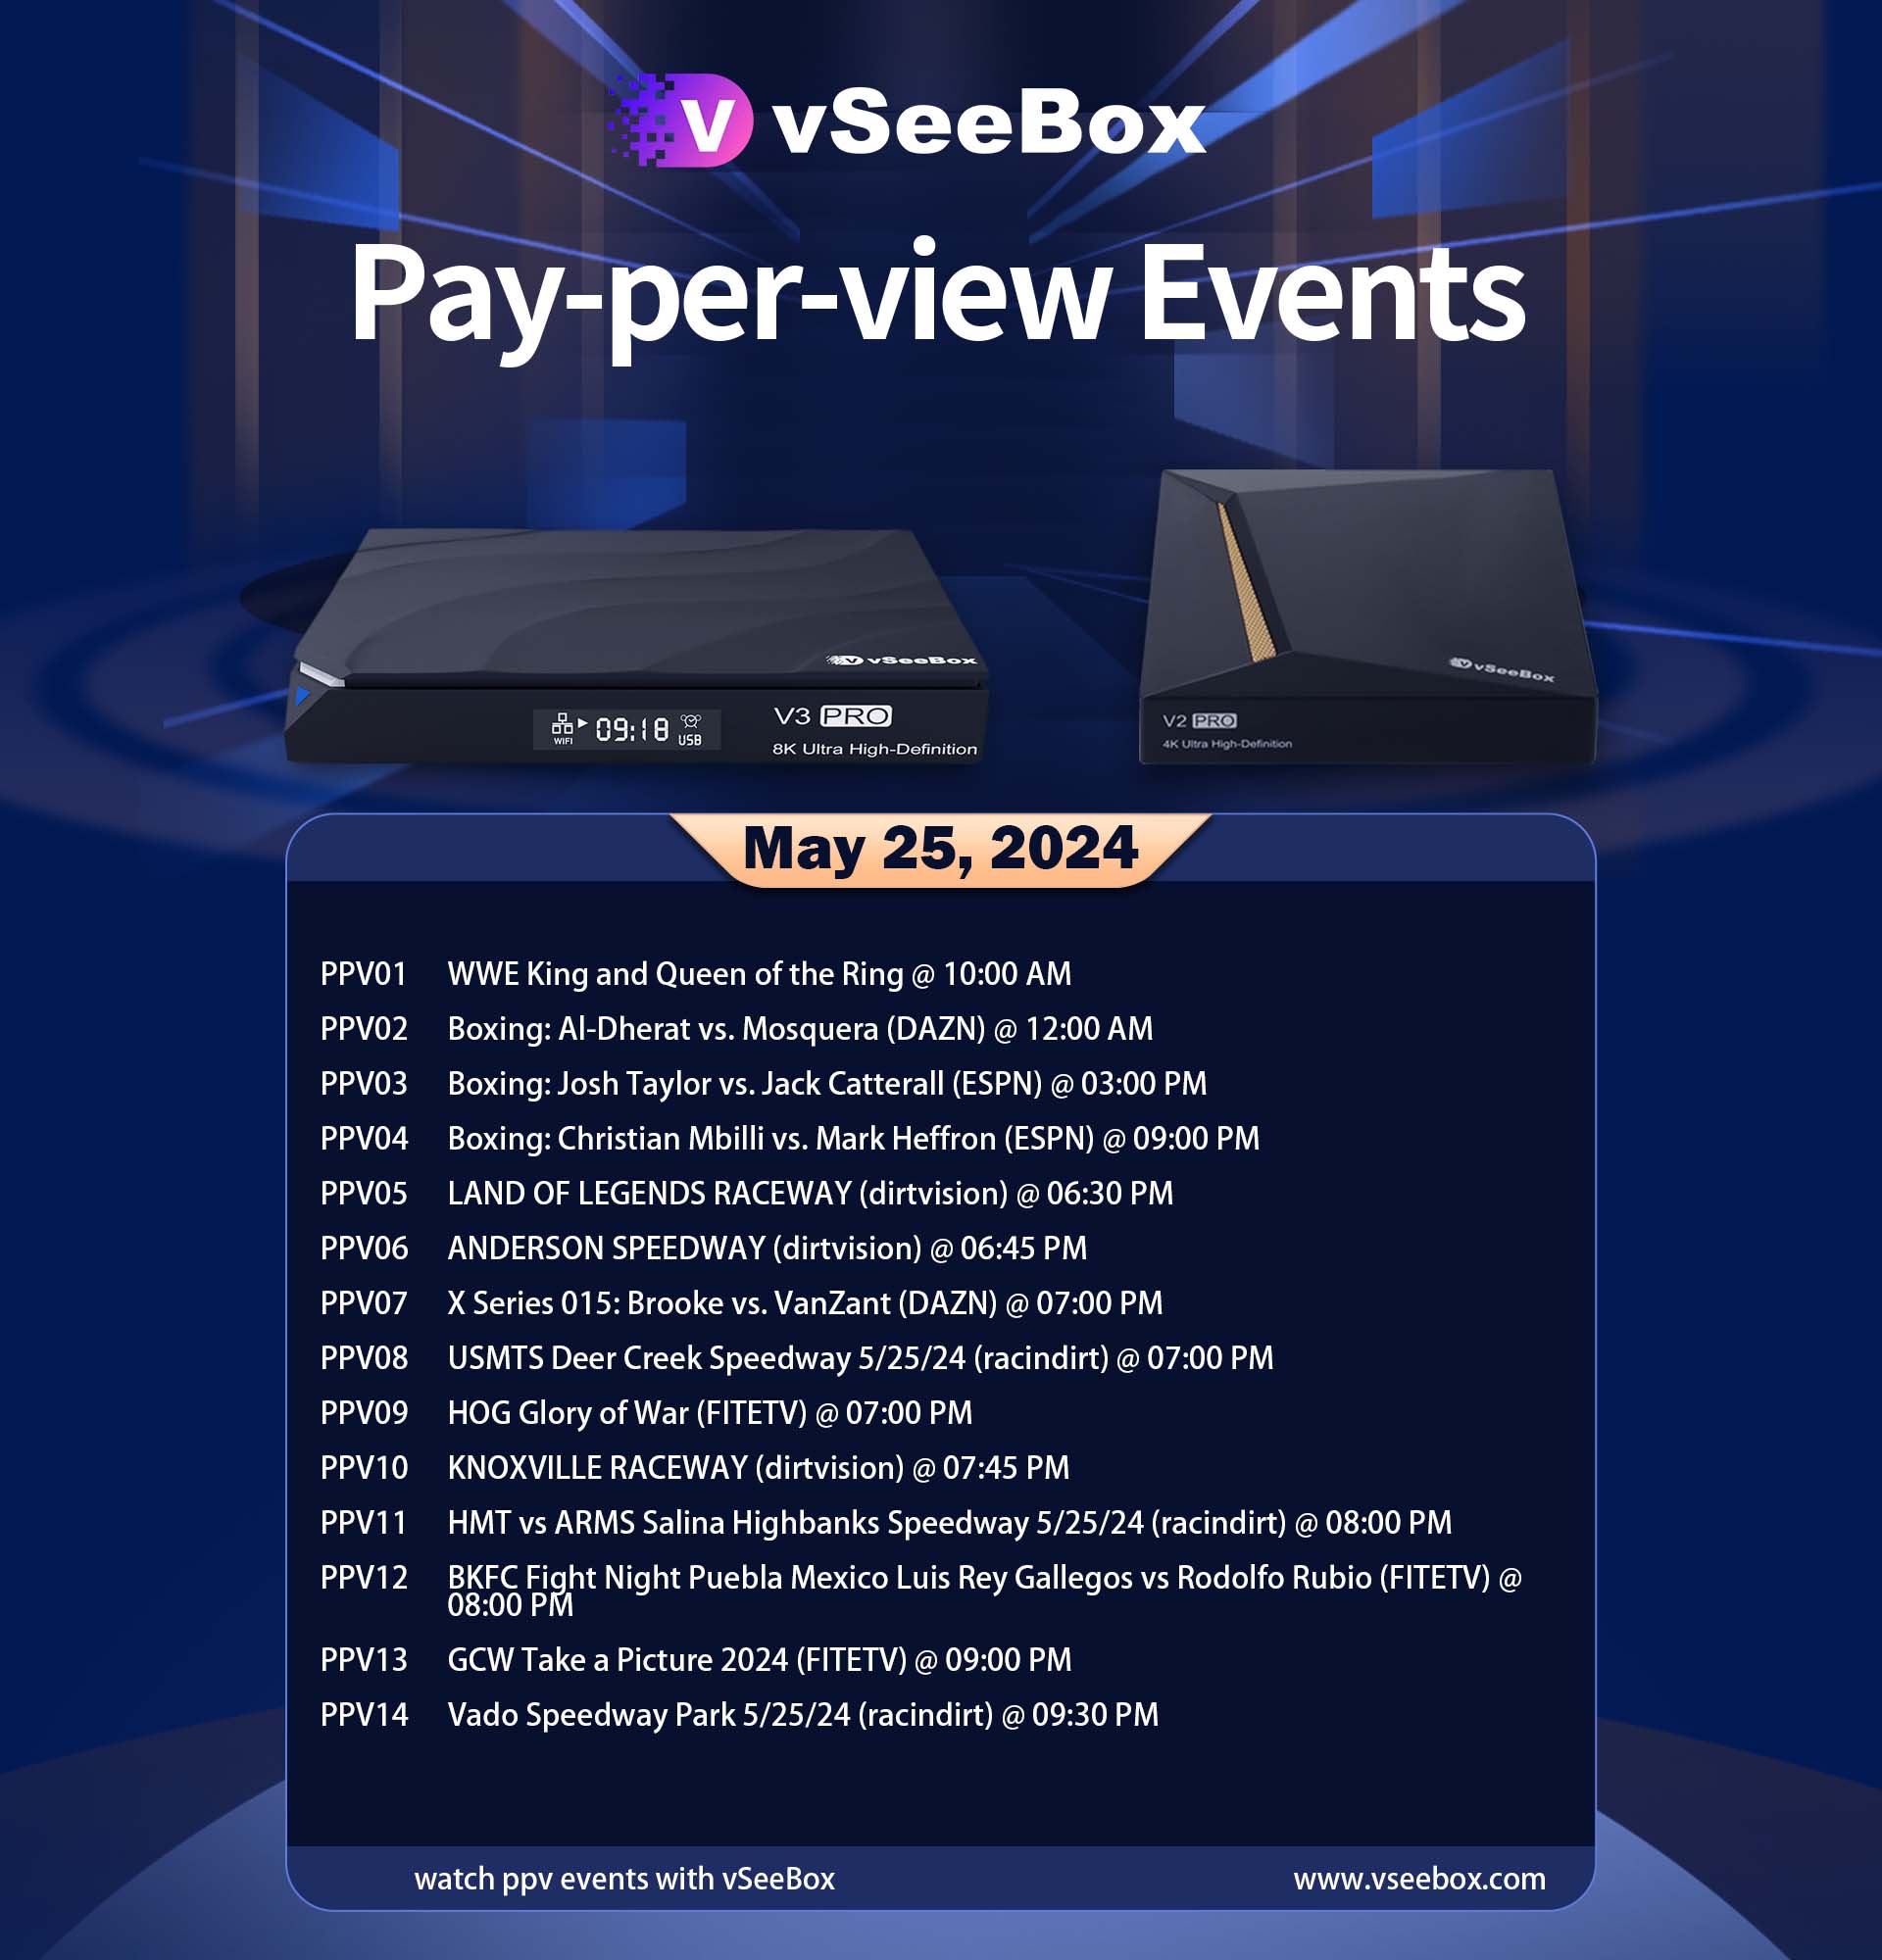 vSeeBox PPV Schedule: May 25, 2024